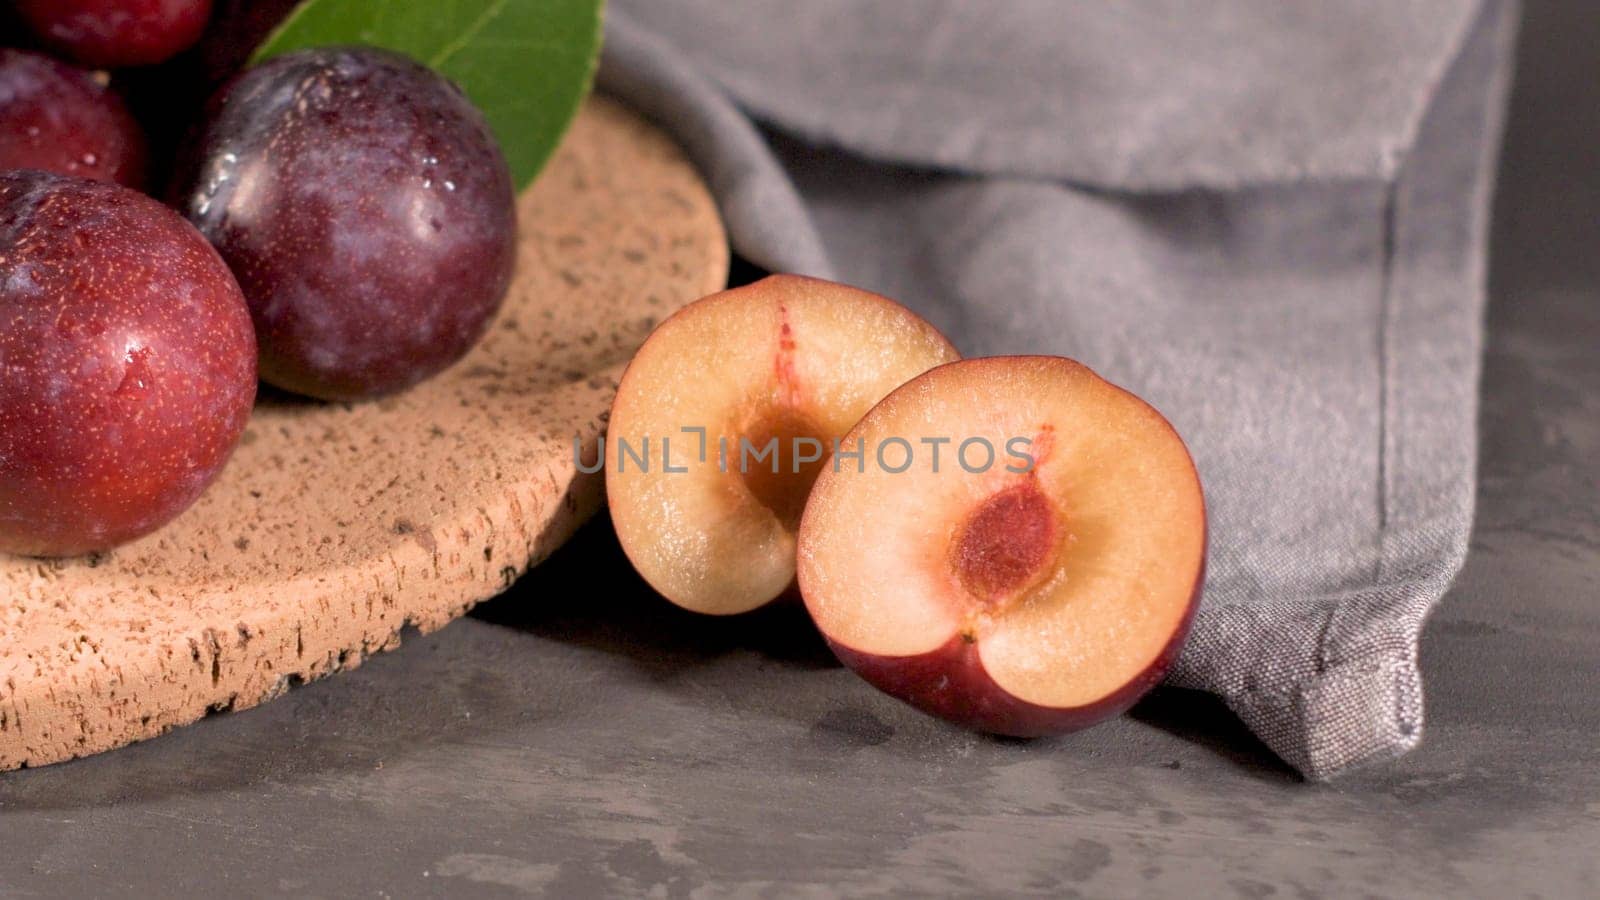 Delicious red plums in a cork plate on kitchen countertop.